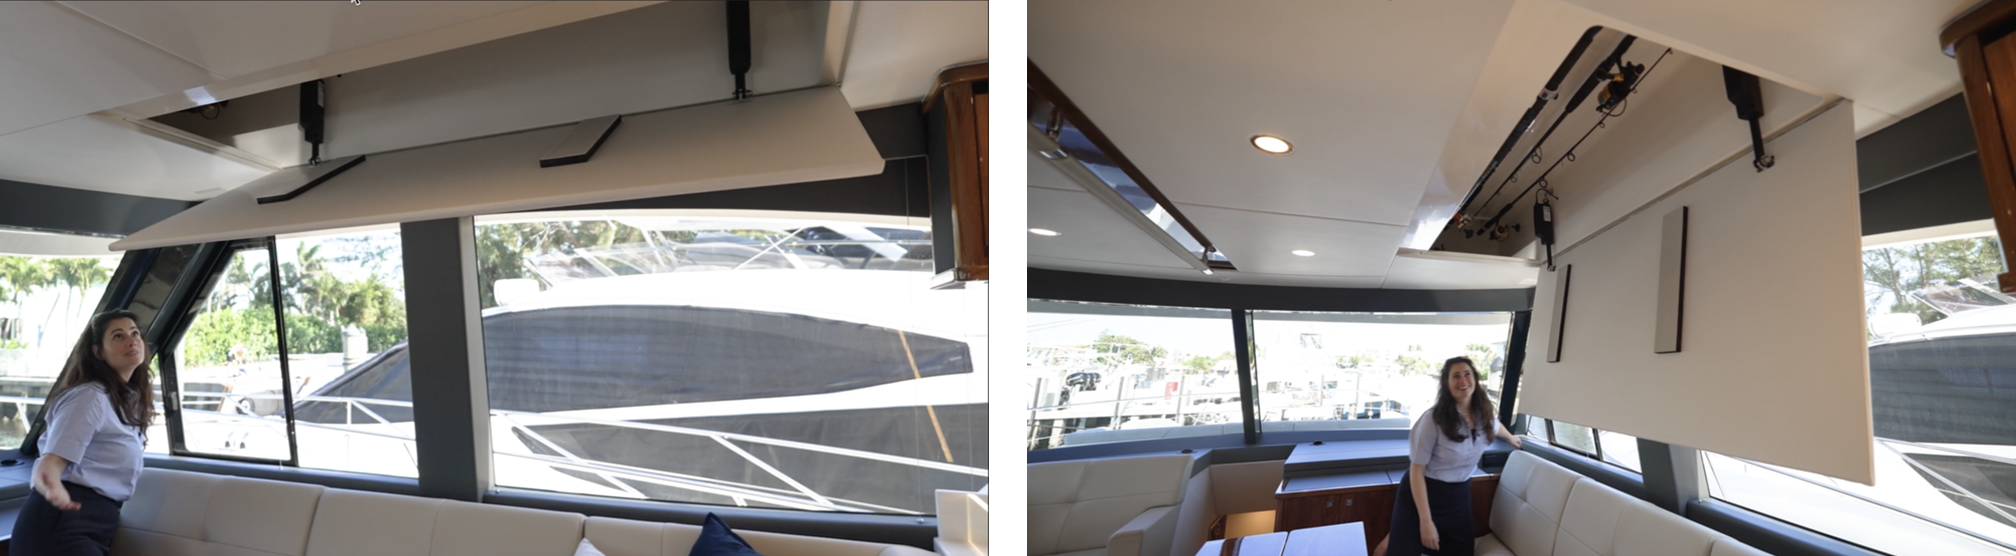 Riviera 58 SMY Captain Boomies demonstrating the hidden ceiling storage compartment